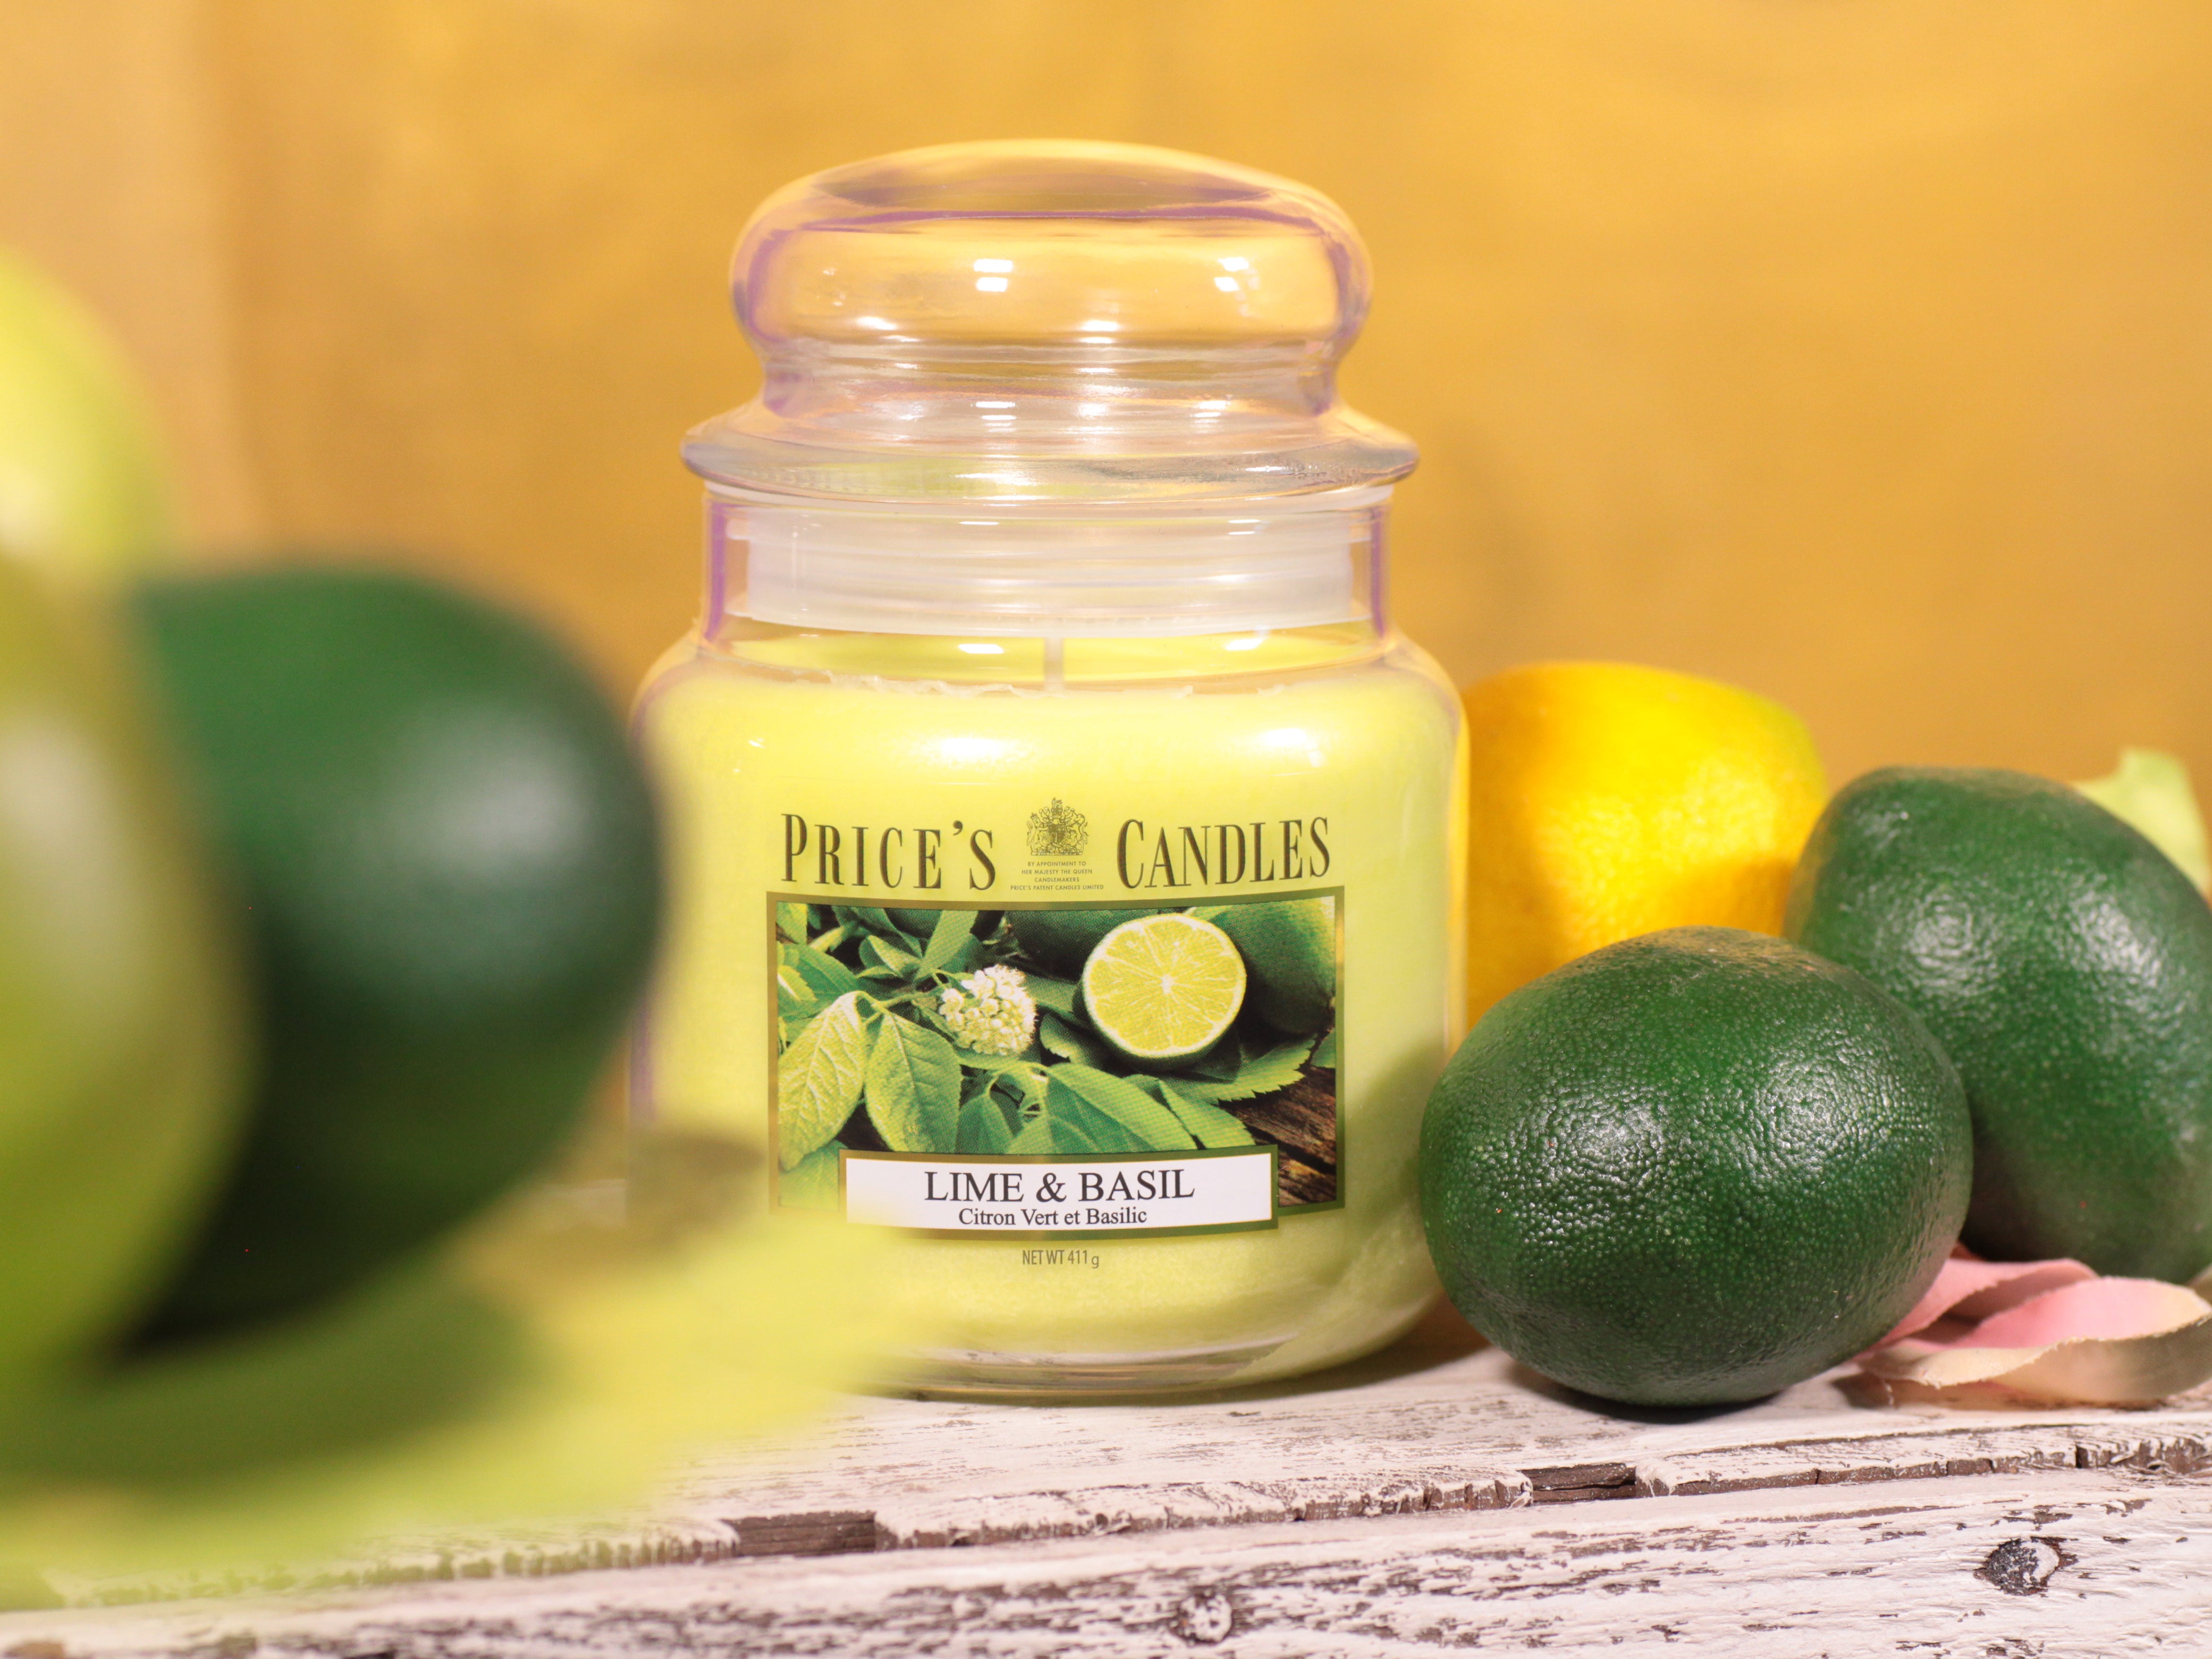 Prices Candles Duftkerze „Lime & Basil“ 411g